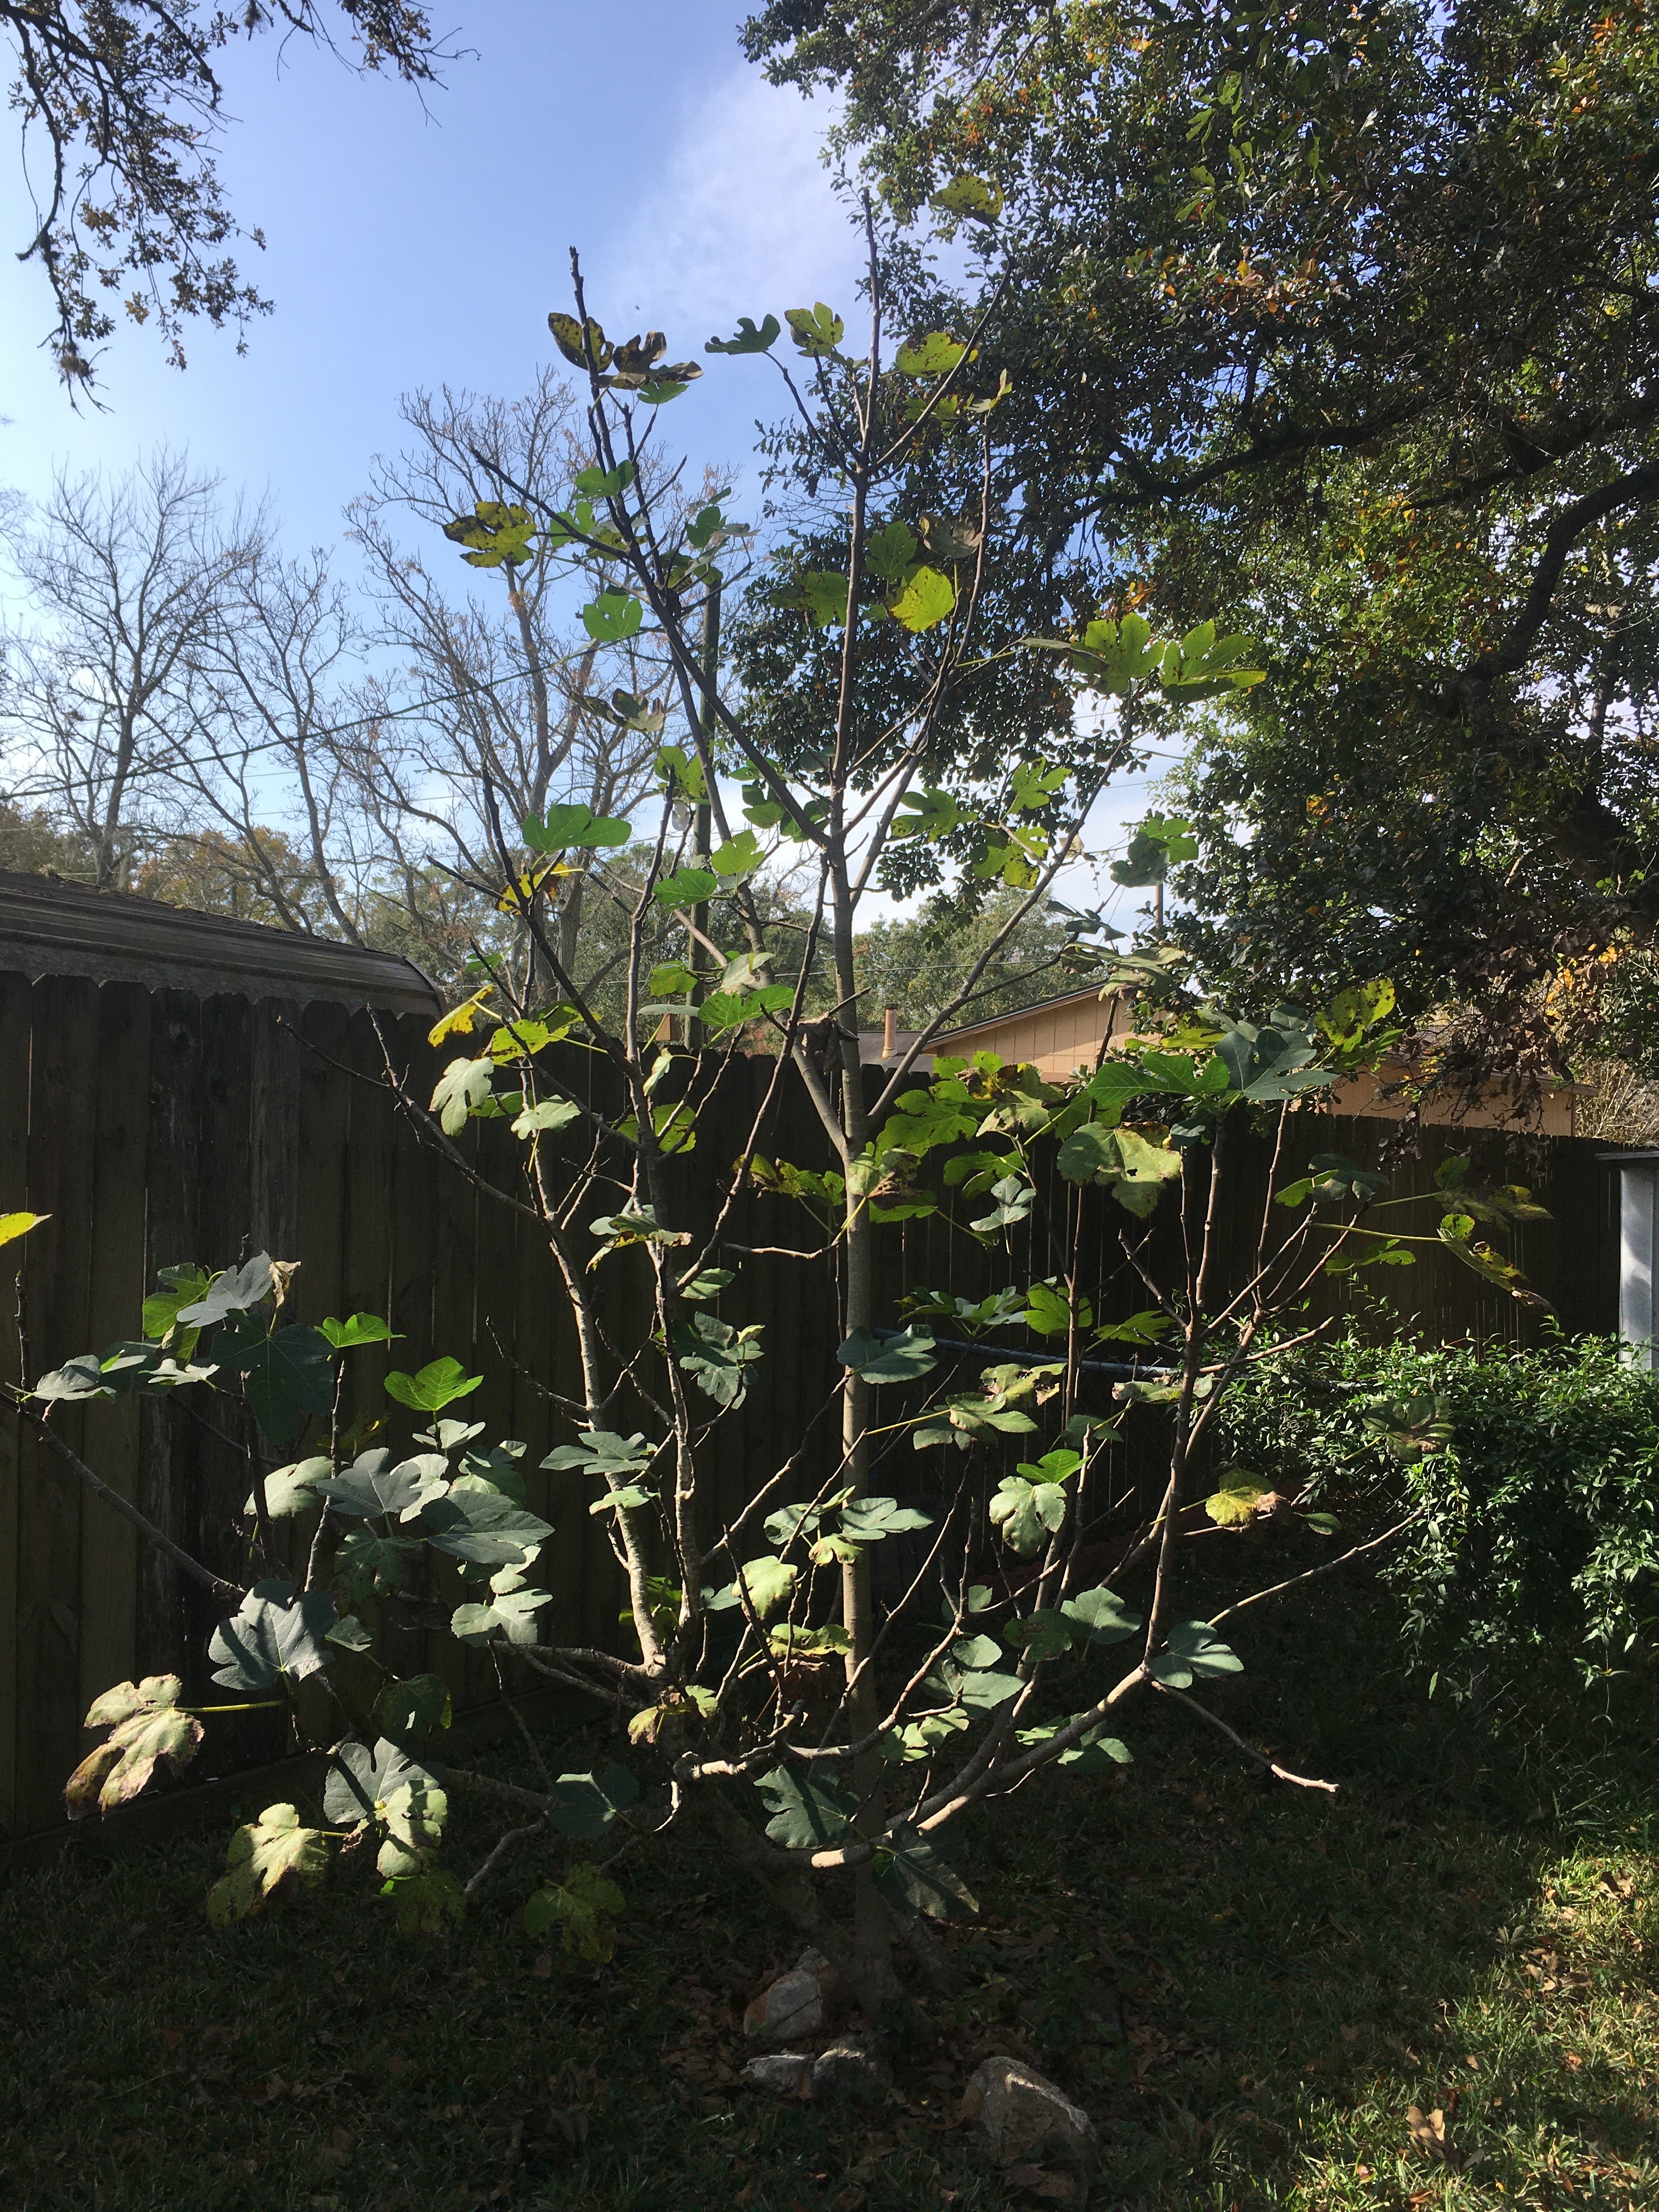 pic of the large fig tree at parent's house November 27th, 2019